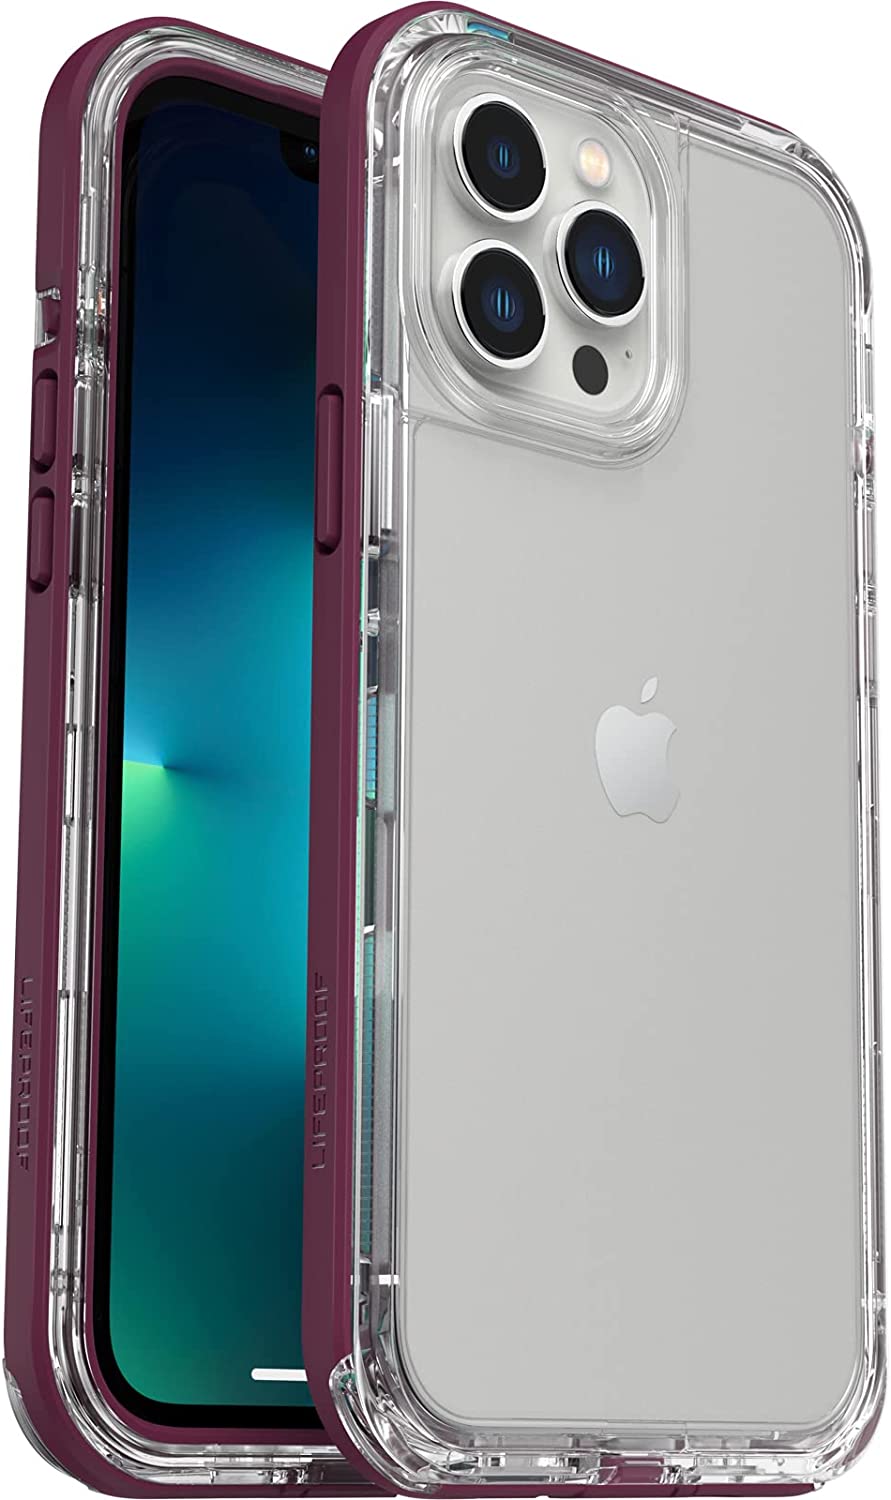 LifeProof NEXT SERIES Case for Apple iPhone 13 Pro Max/12 Pro Max - Essential Purple (Certified Refurbished)